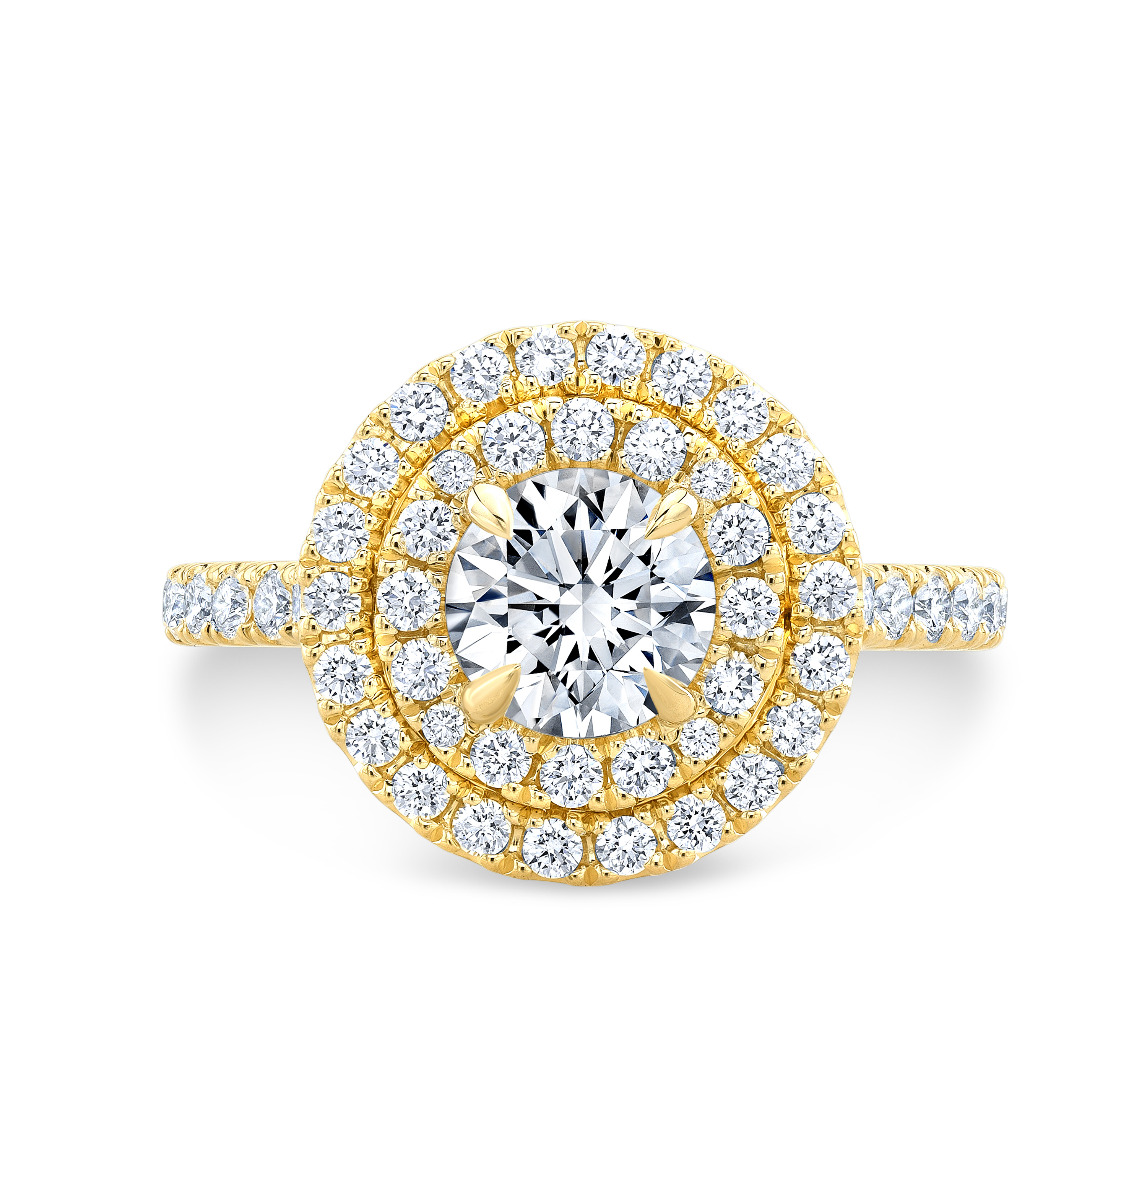 luxurious double Halo U-prong, pave natural diamonds engagement ring in yellow gold.